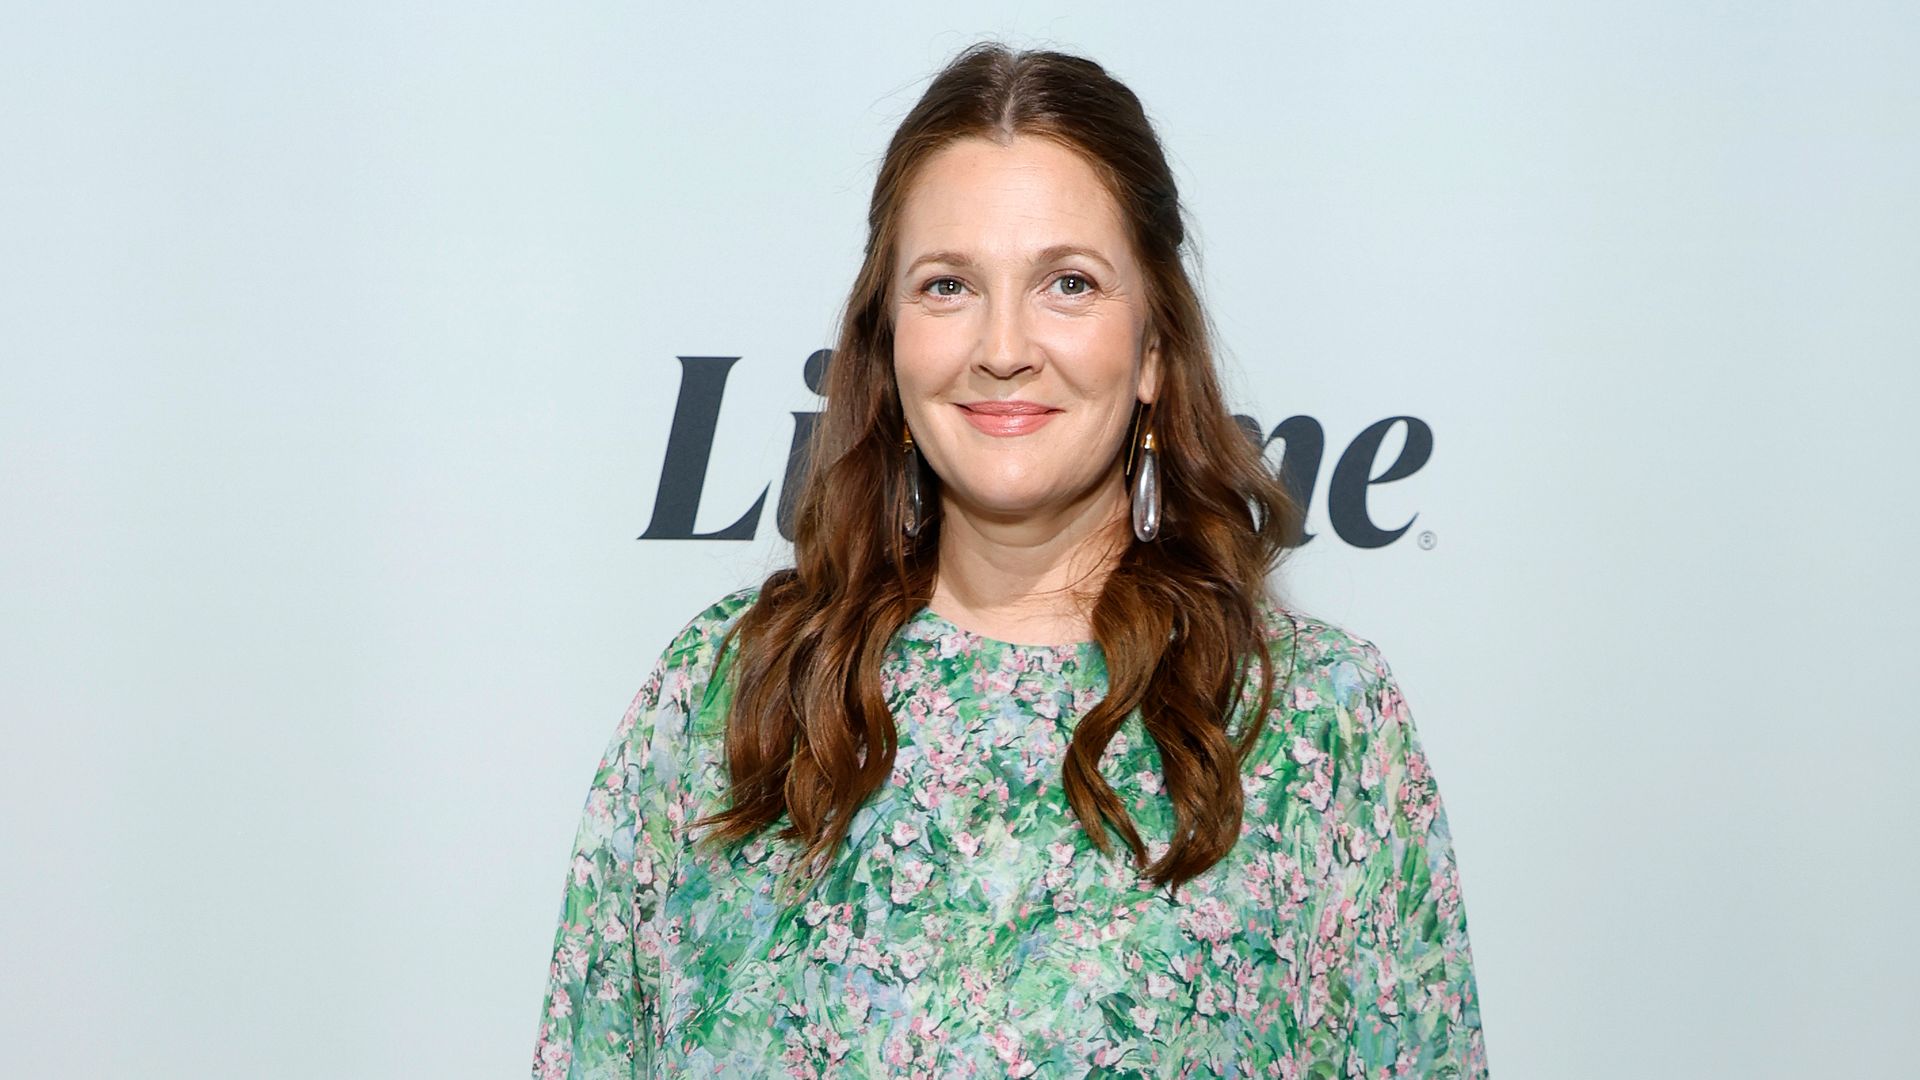 Drew Barrymore attends Variety's 2022 Power Of Women at The Glasshouse on May 05, 2022 in New York City